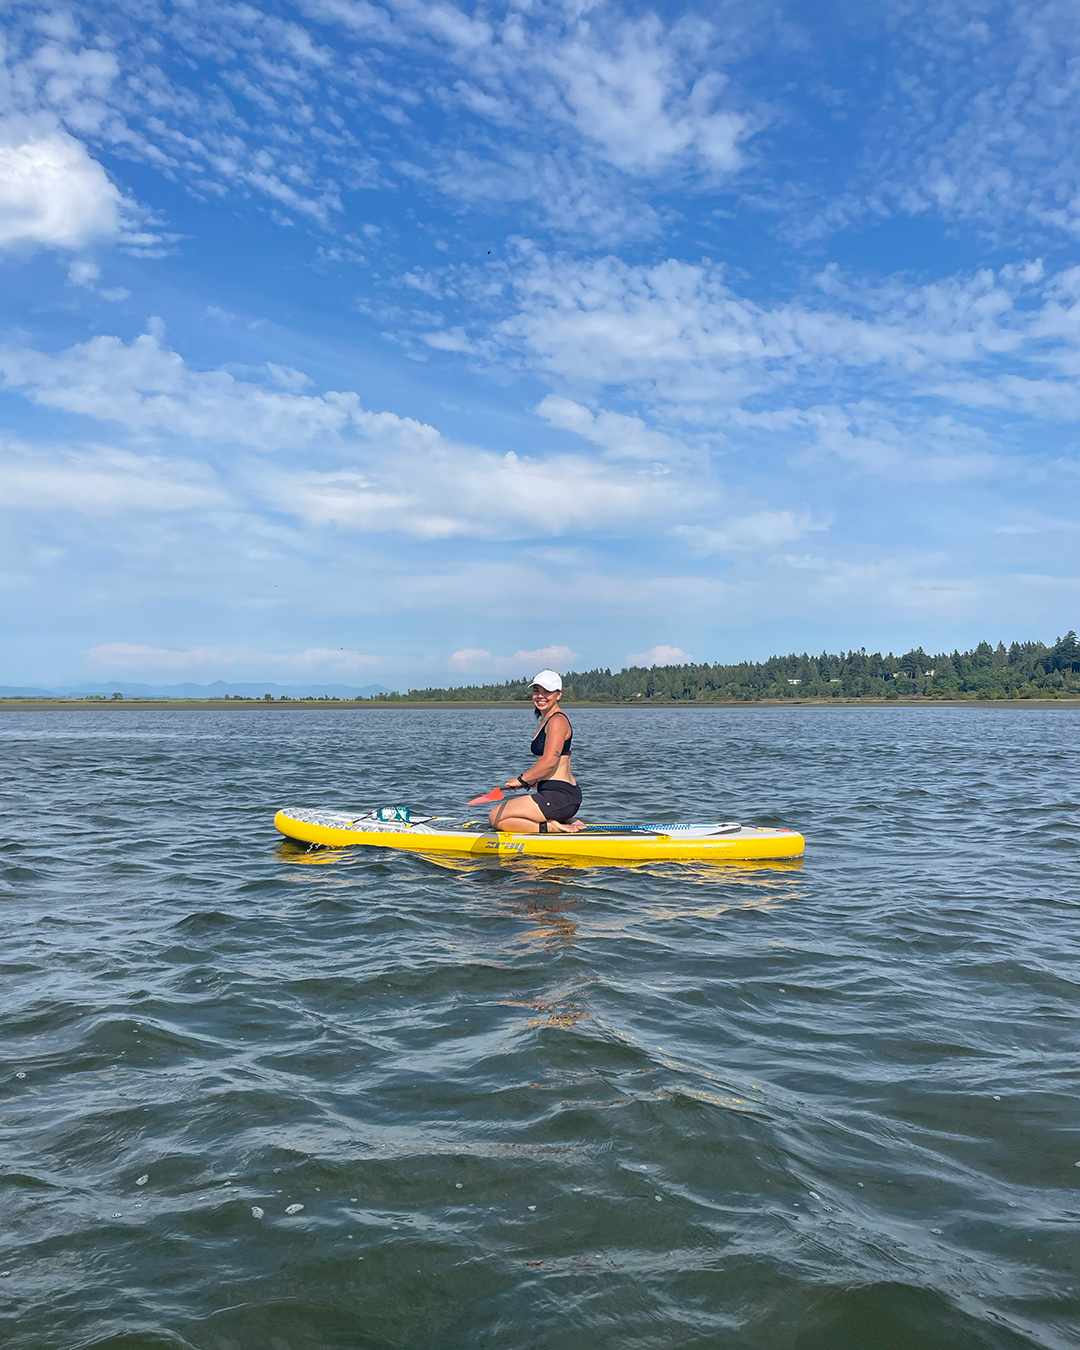  Paddleboarding on the ocean feels like the perfect summer activity.  